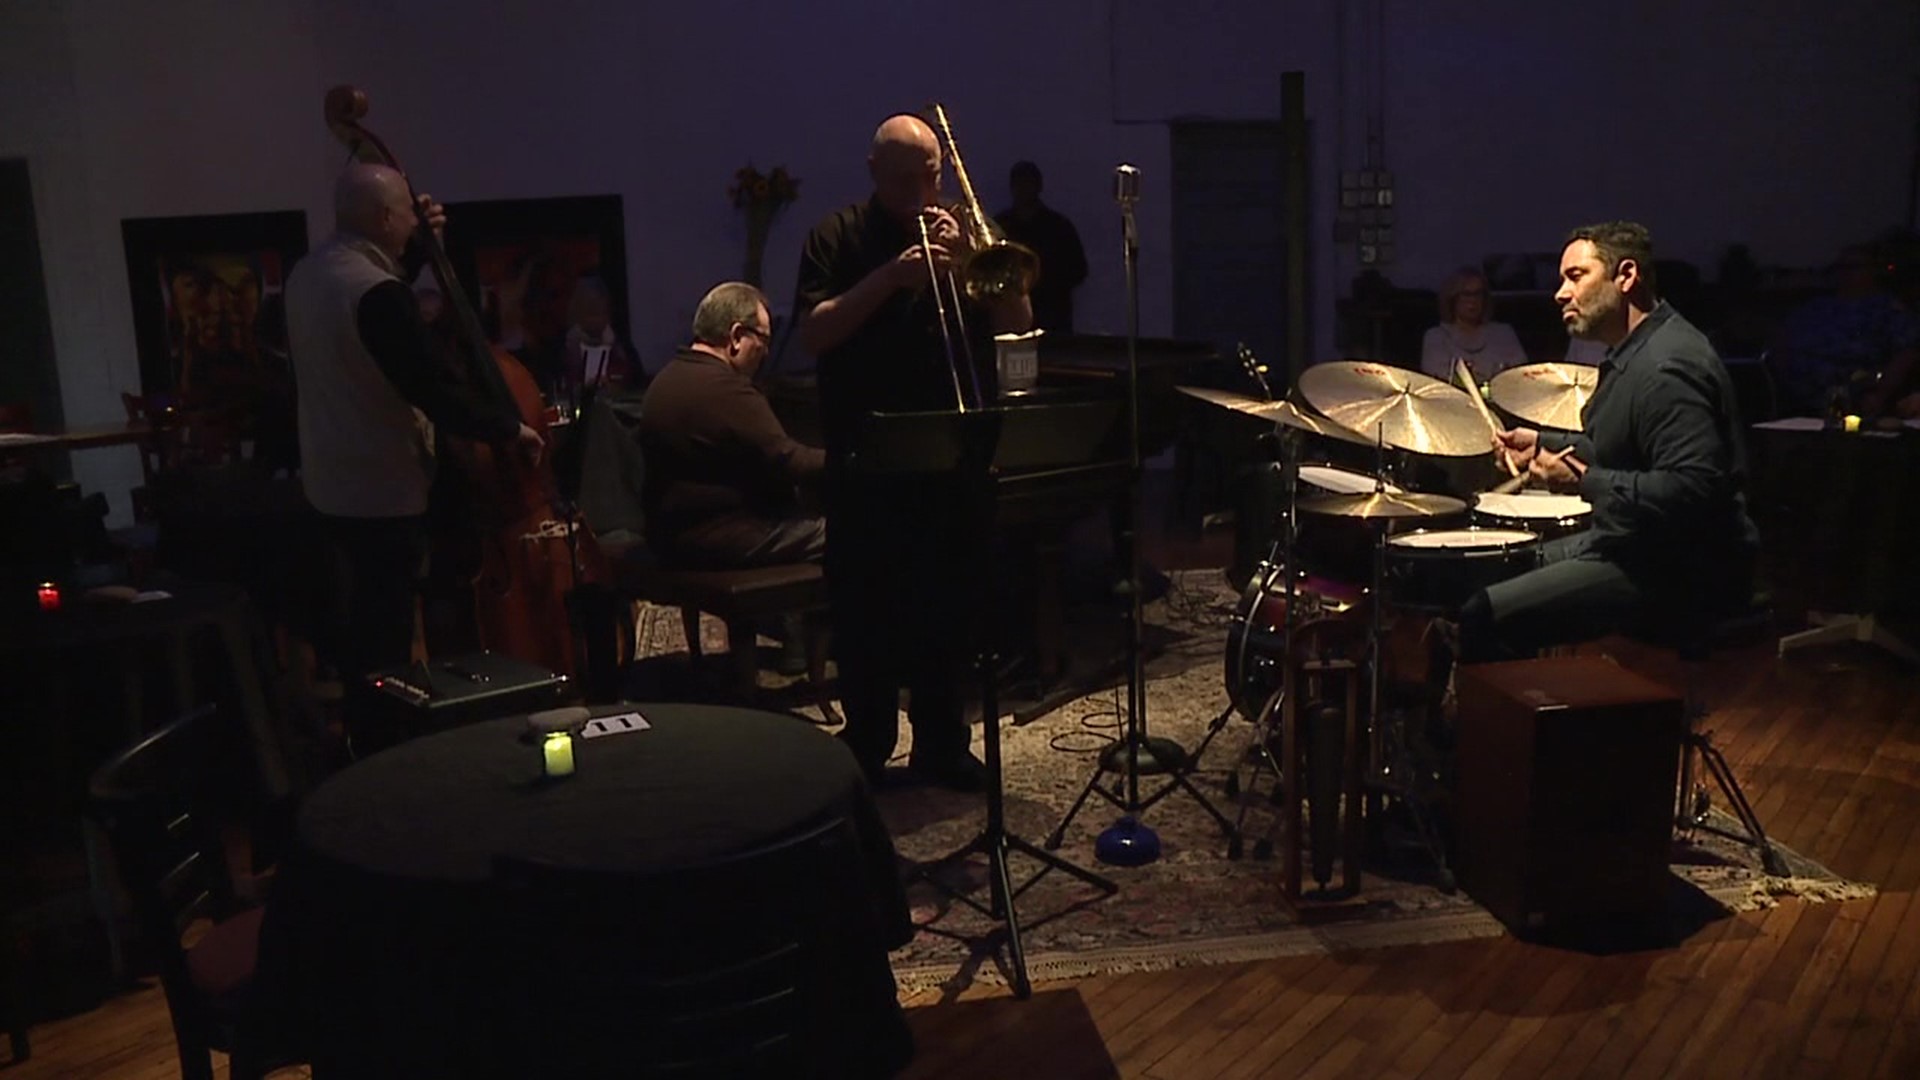 Some jazz musicians at Stabin Museum are sharing their talents to help the people of Ukraine.